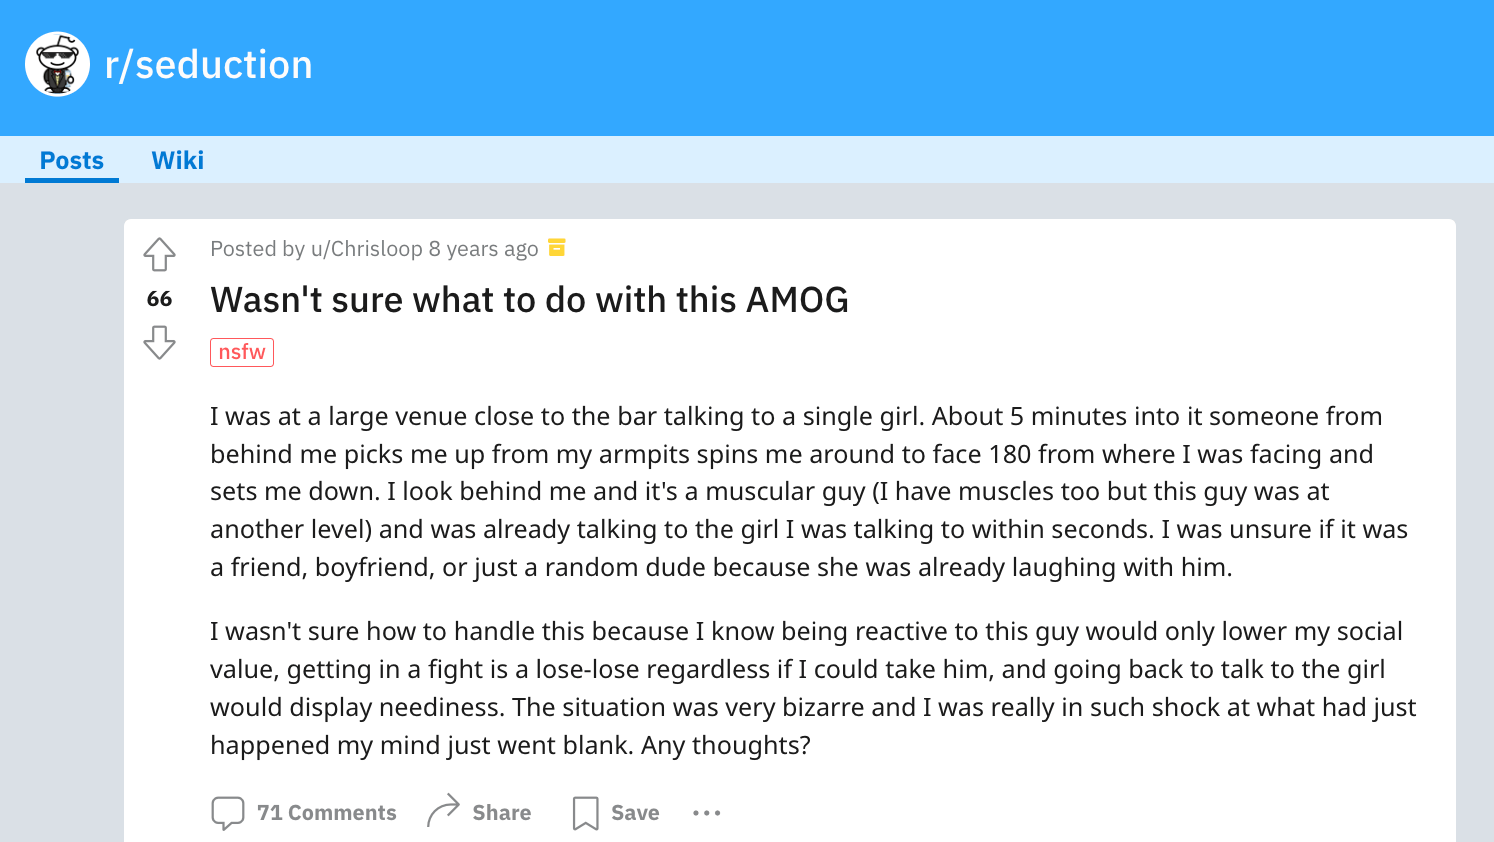 A Redditor discussing their interaction with an AMOG